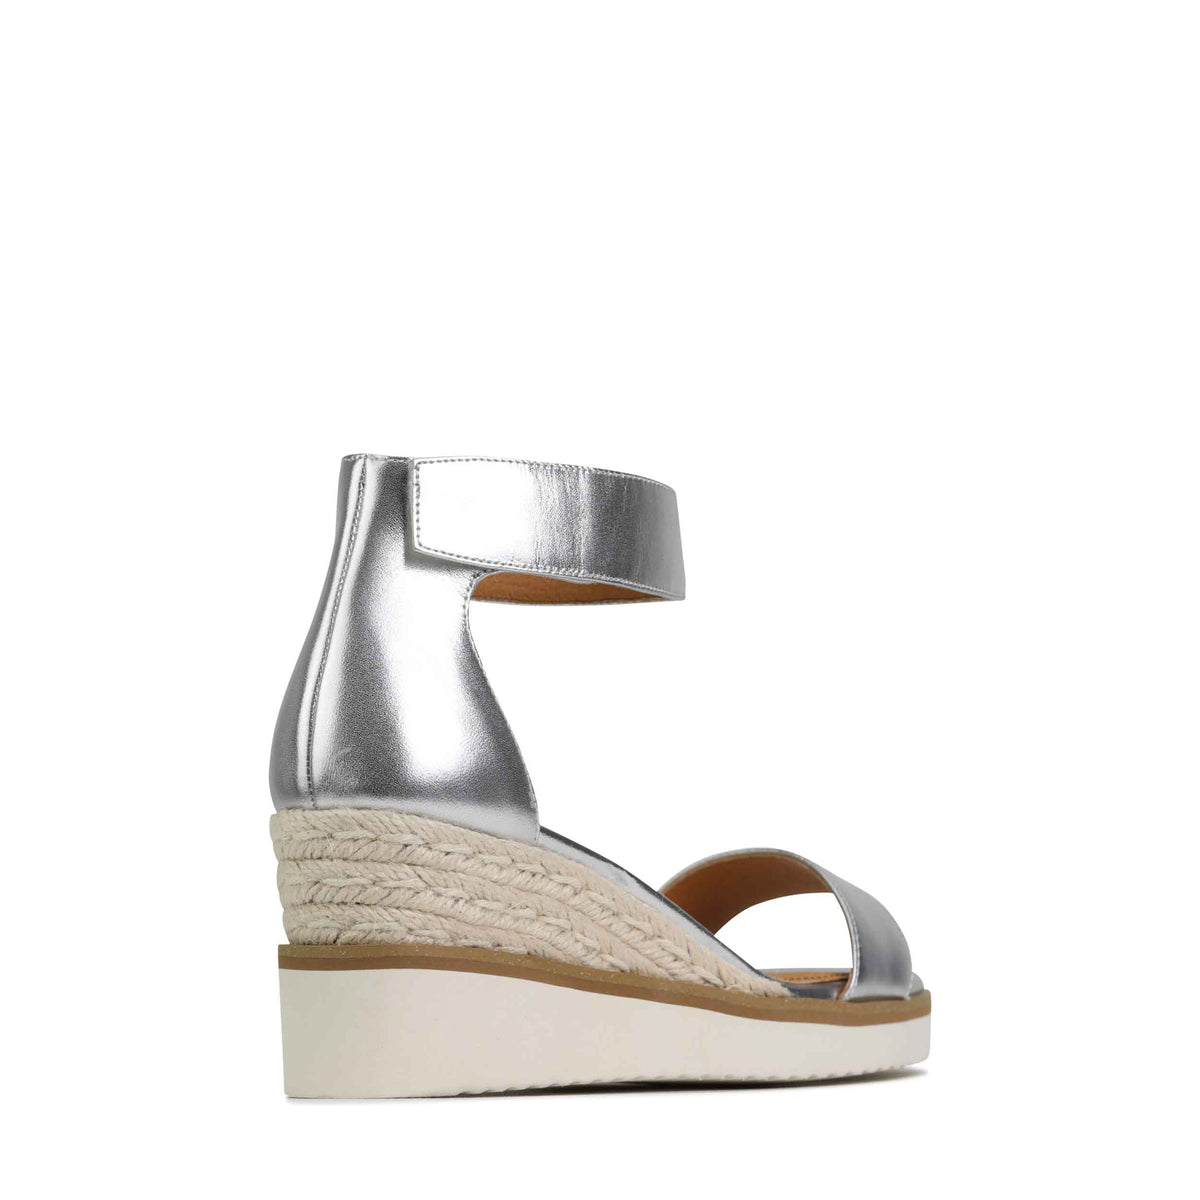 Parallel Culture Shoes and Fashion Online WEDGES EOS LAZY WEDGE